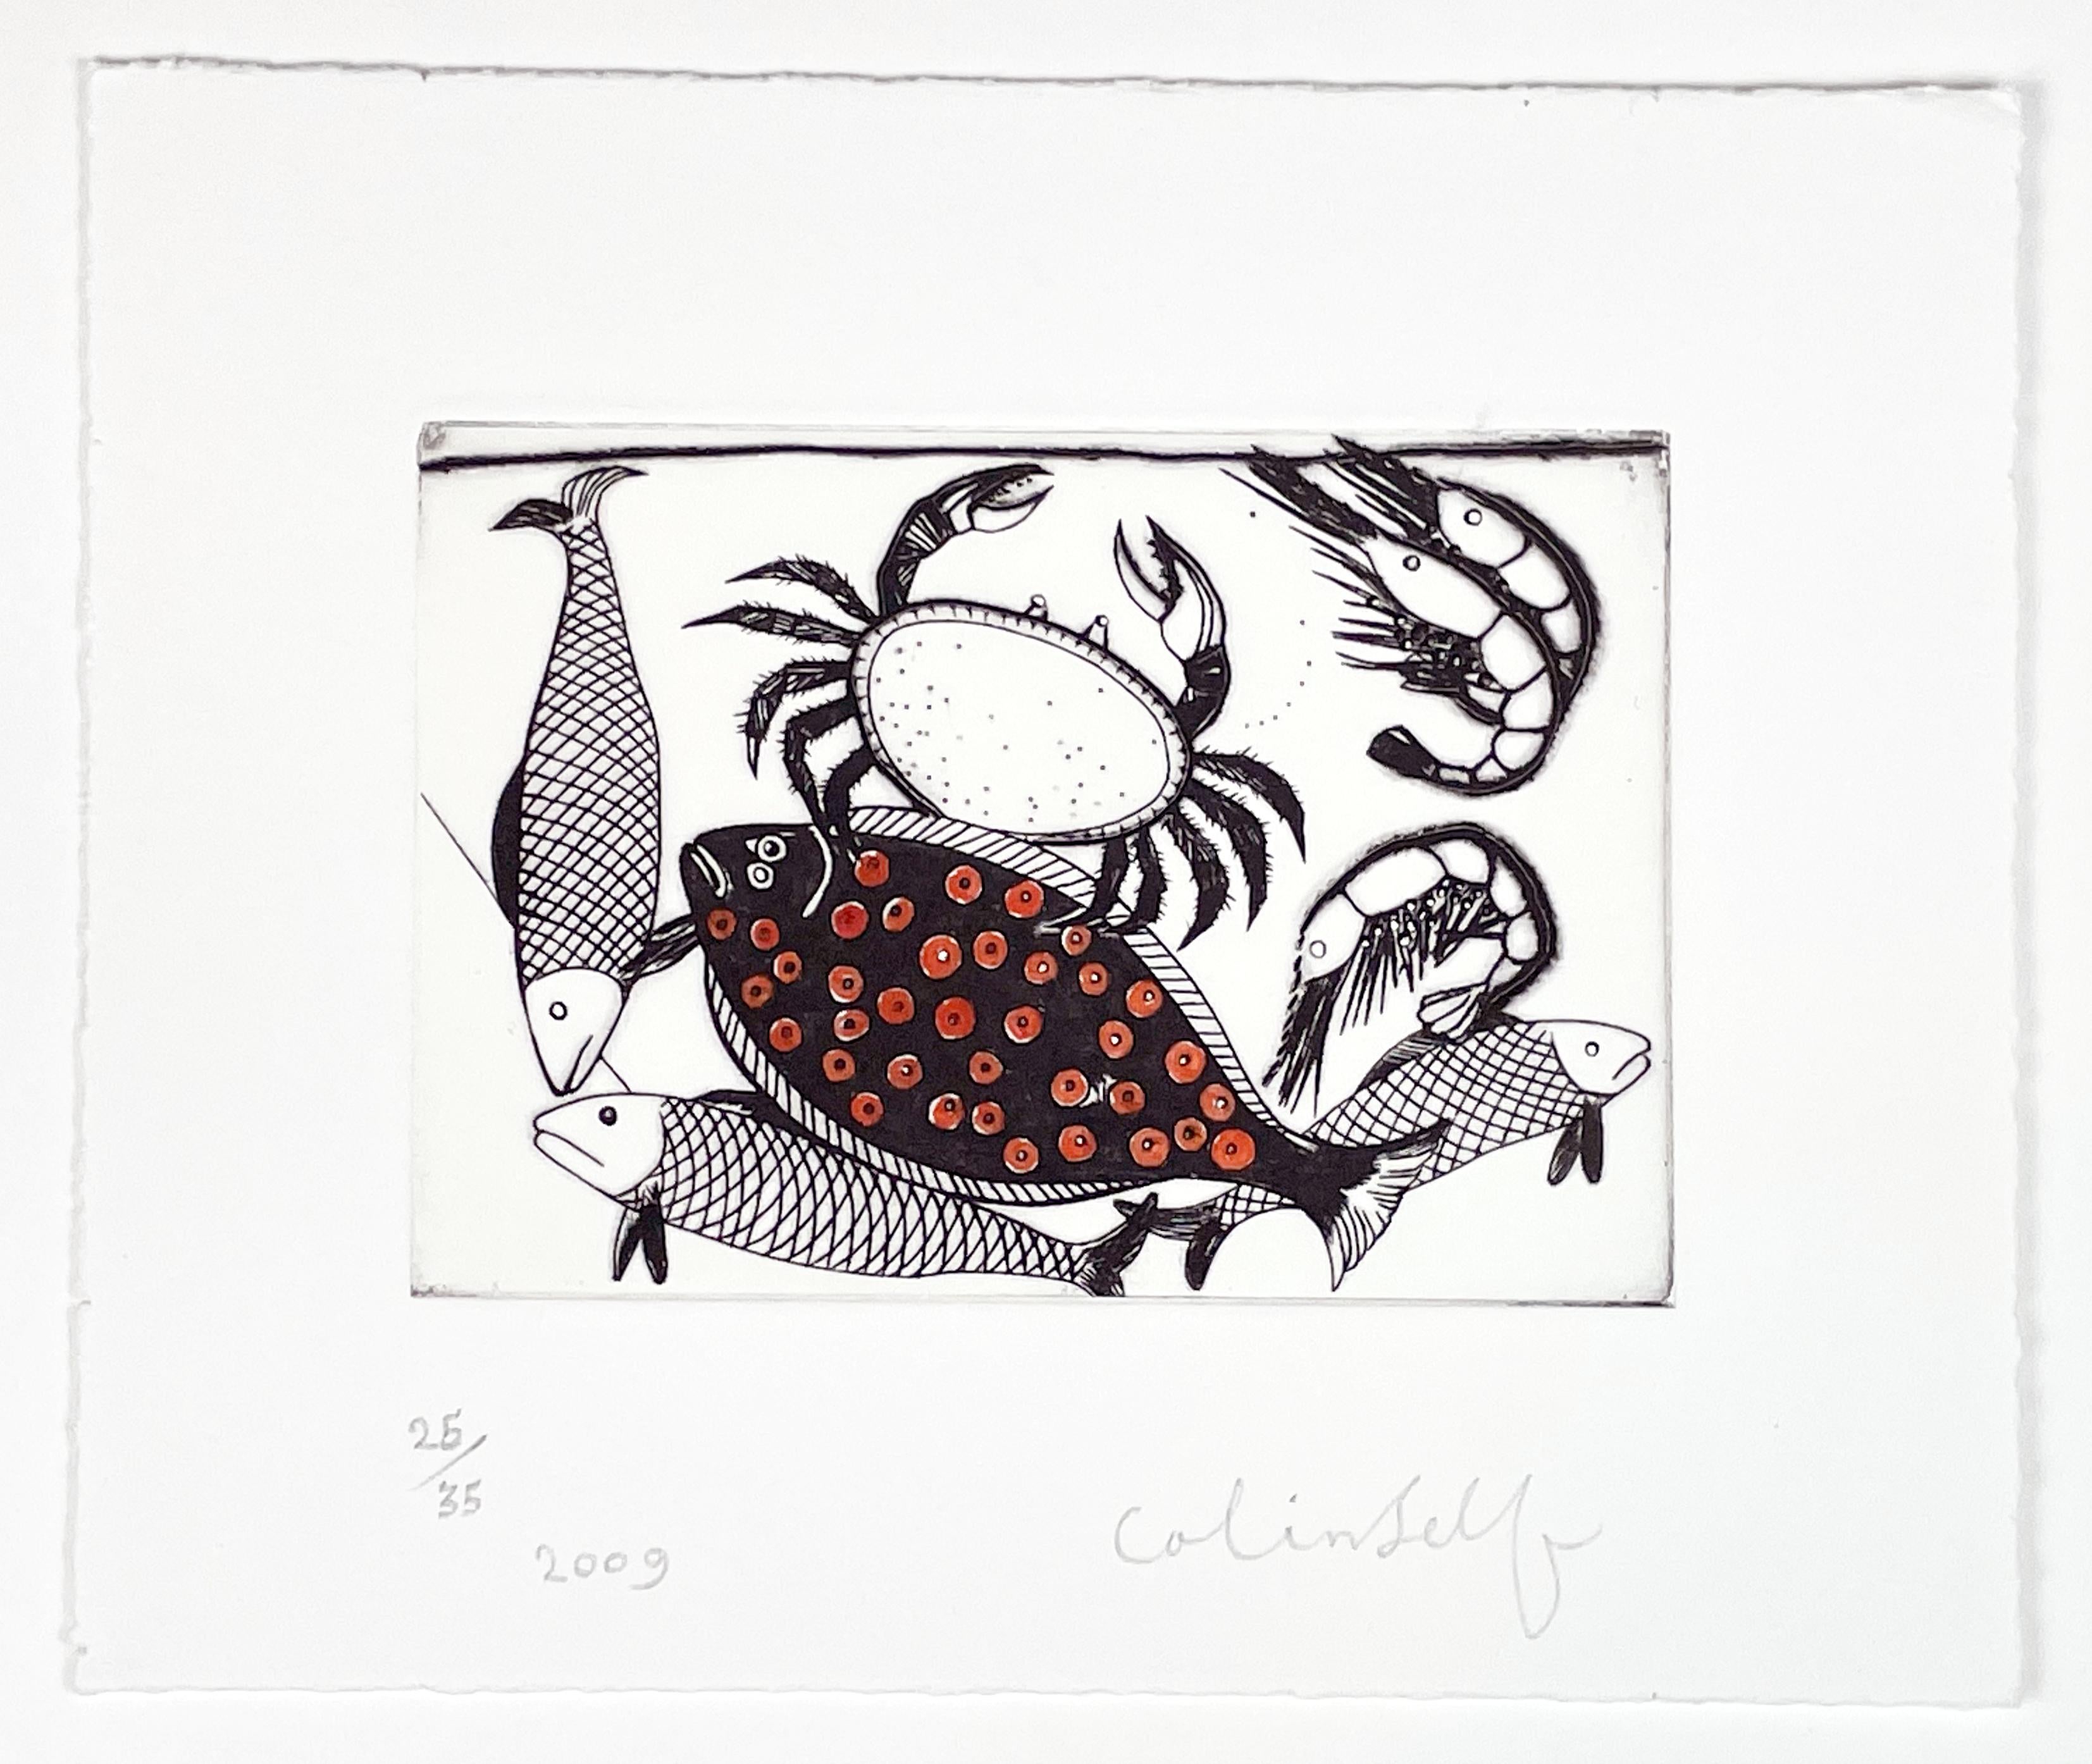 Crab, Plaice and Prawns - Print by Colin Self